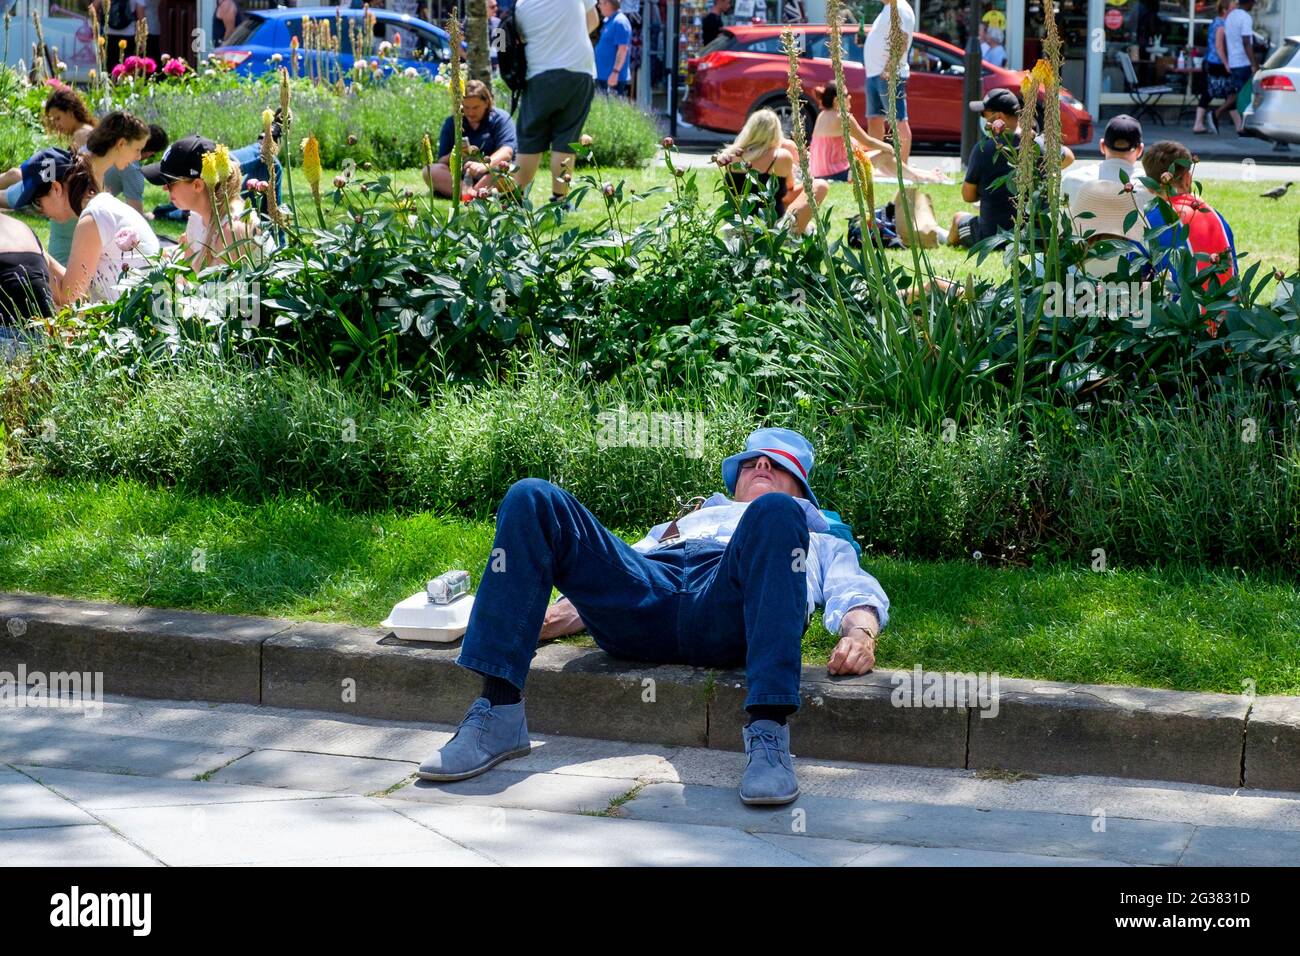 Bath, UK, 14th June, 2021. With many parts of the UK enjoying another very hot and sunny day, people in the centre of Bath are pictured enjoying the warm sunshine. Credit: Lynchpics/Alamy Live News Stock Photo